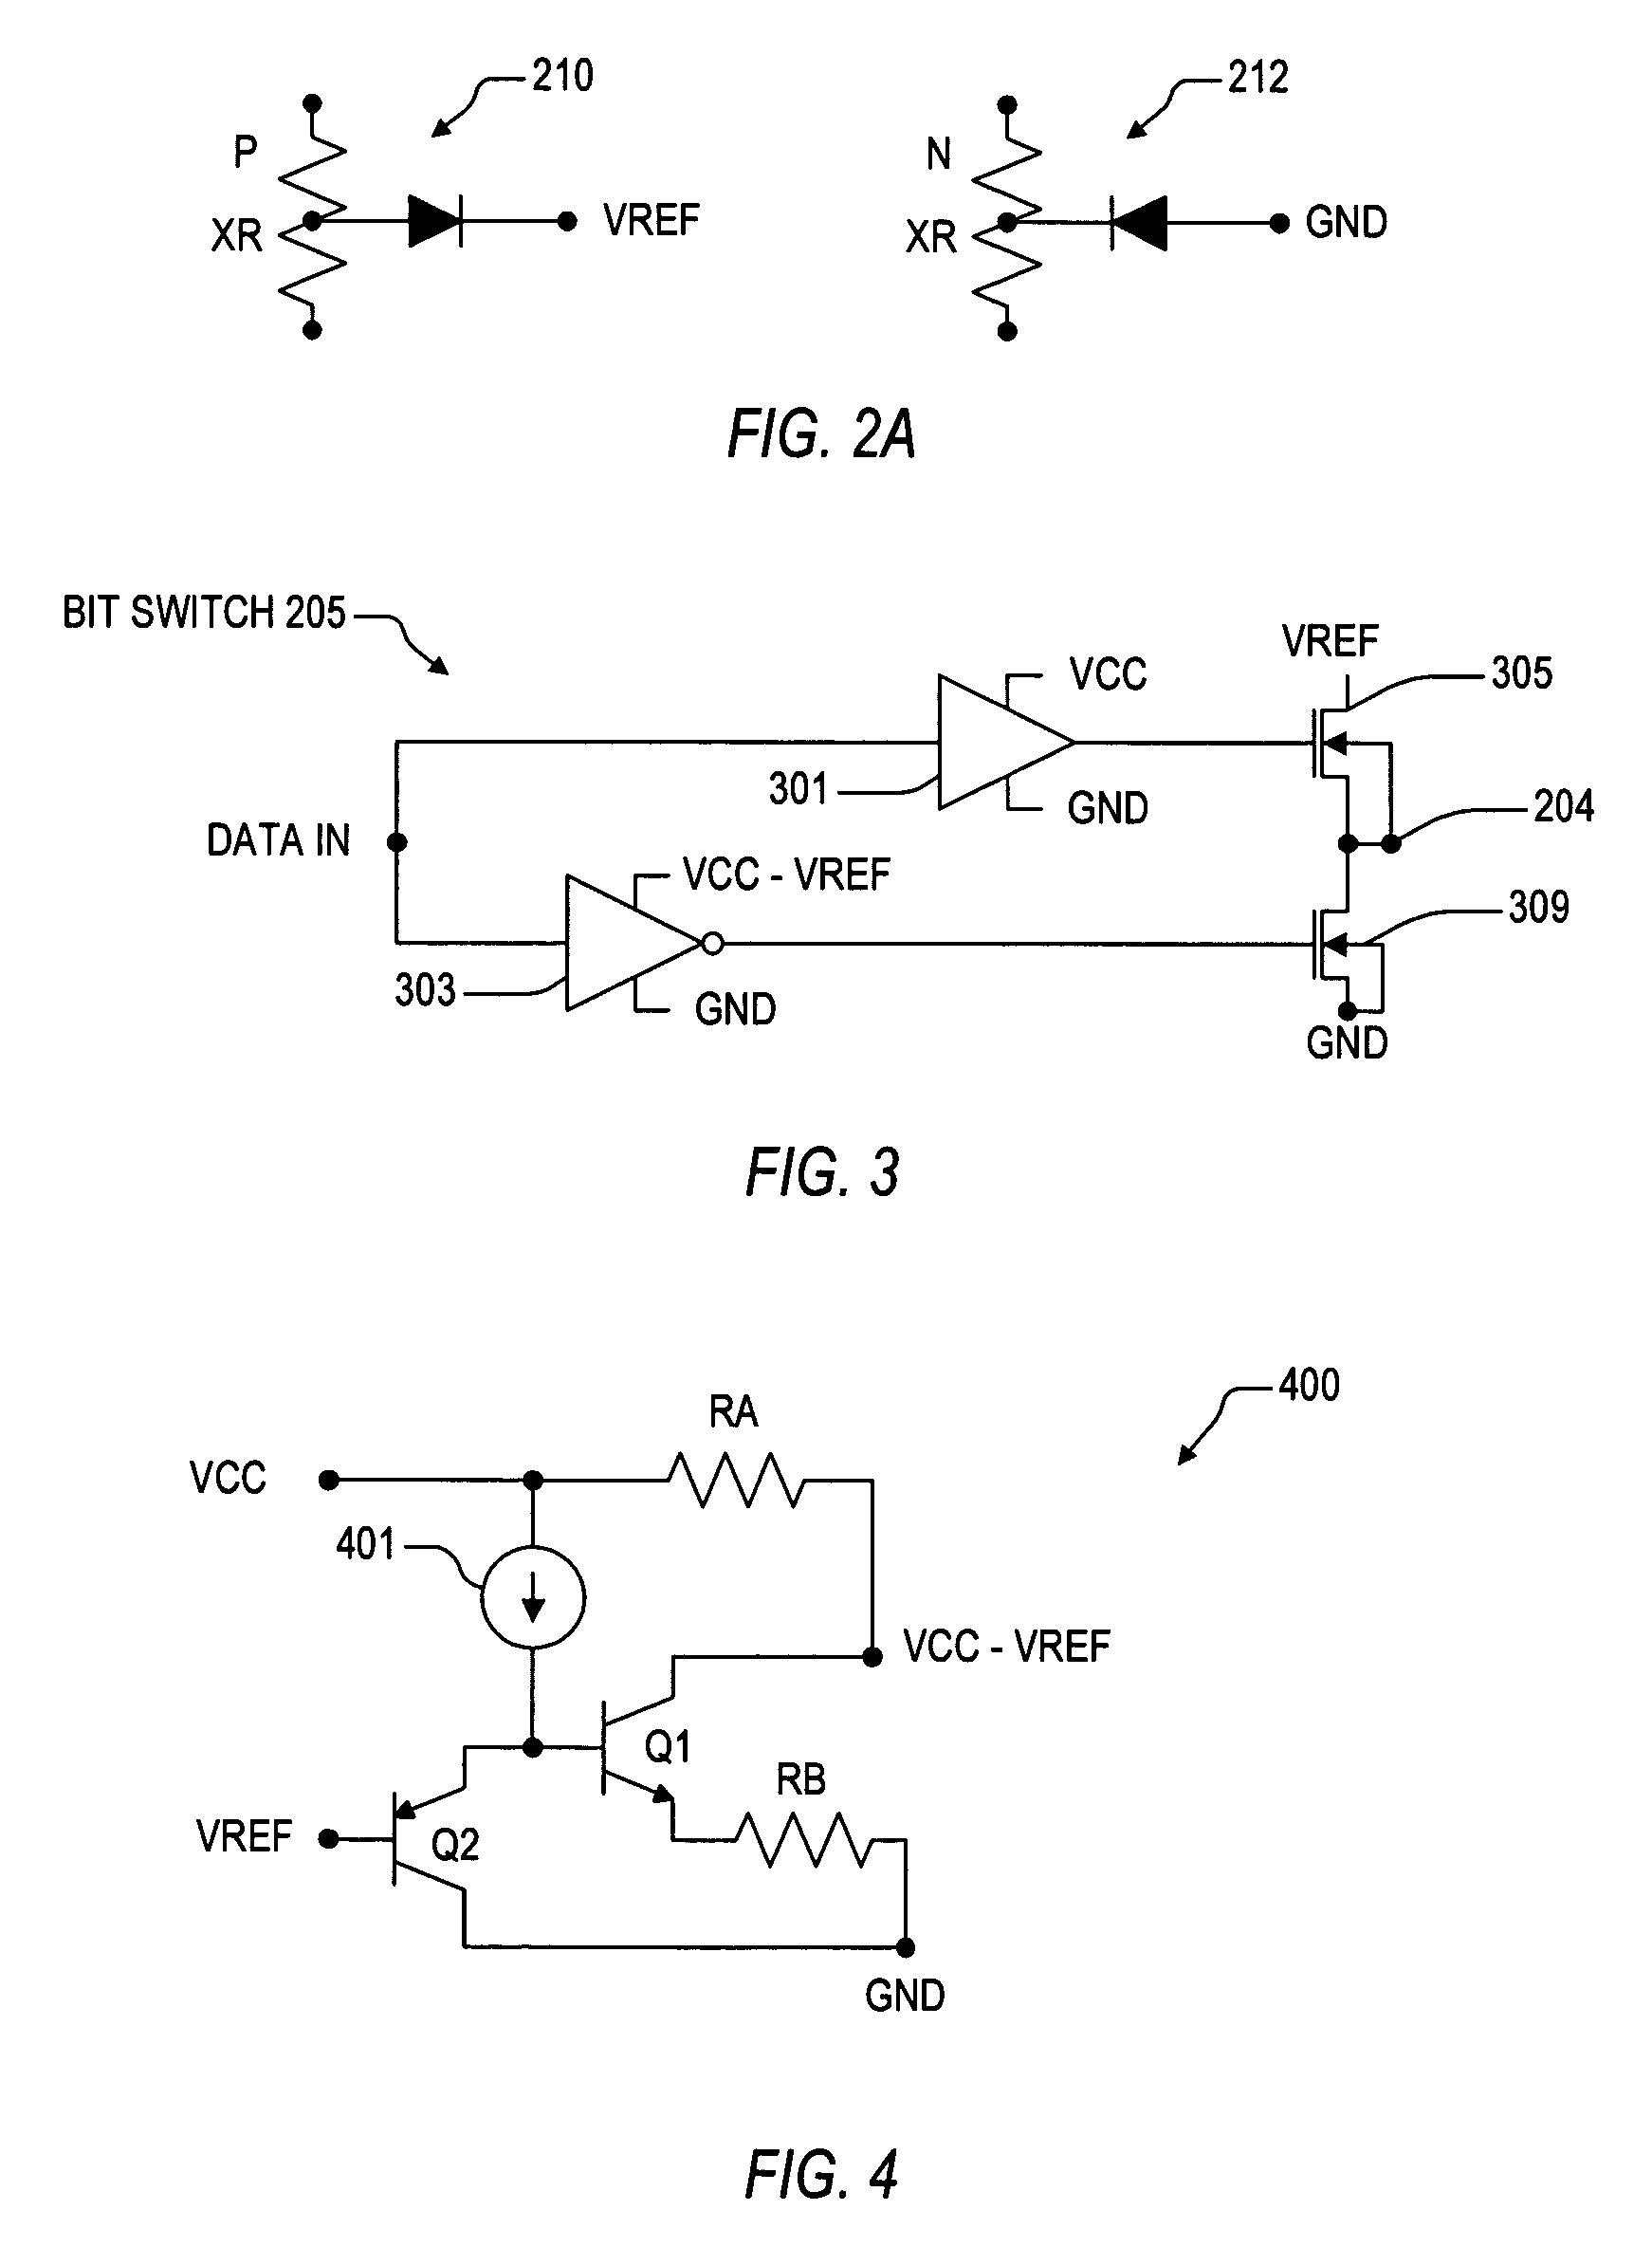 High accuracy digital to analog converter using parallel P and N type resistor ladders